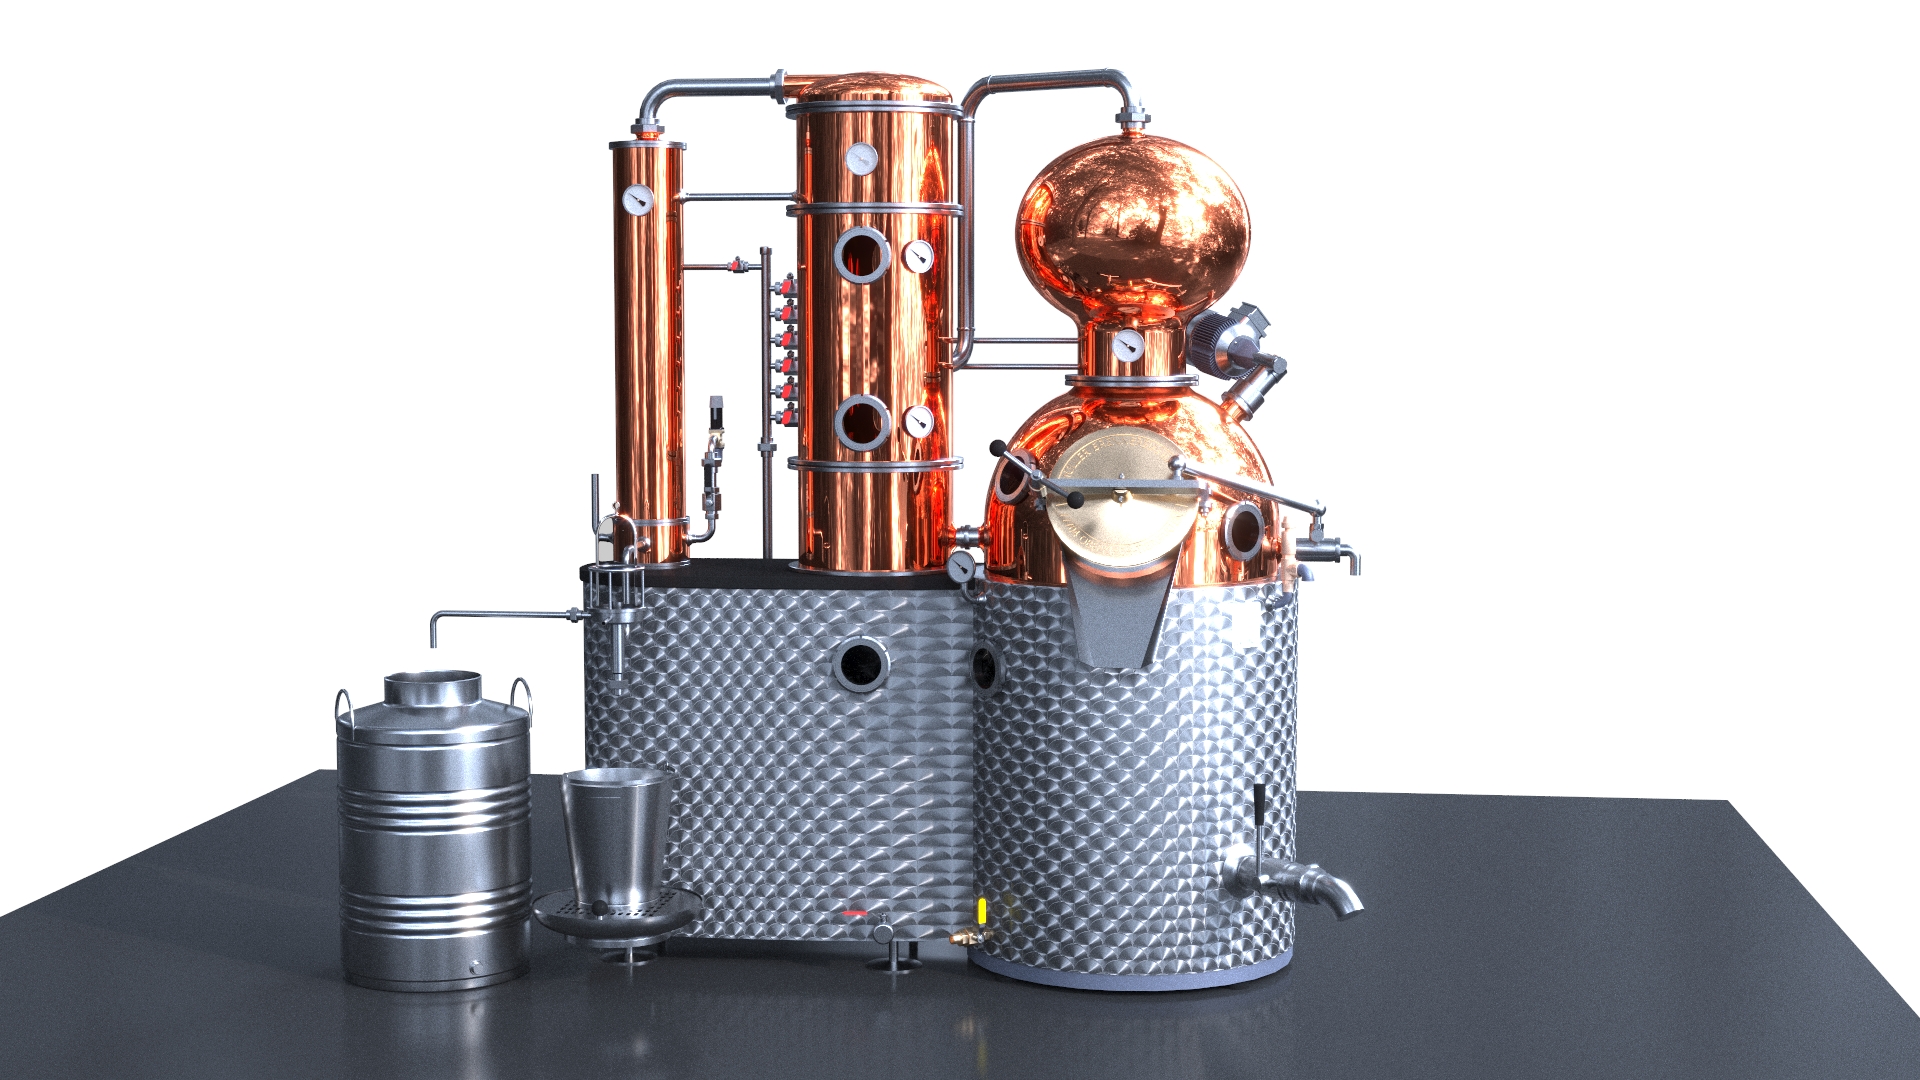 High-Quality CG Model of a Distiller Rendered on a White Background